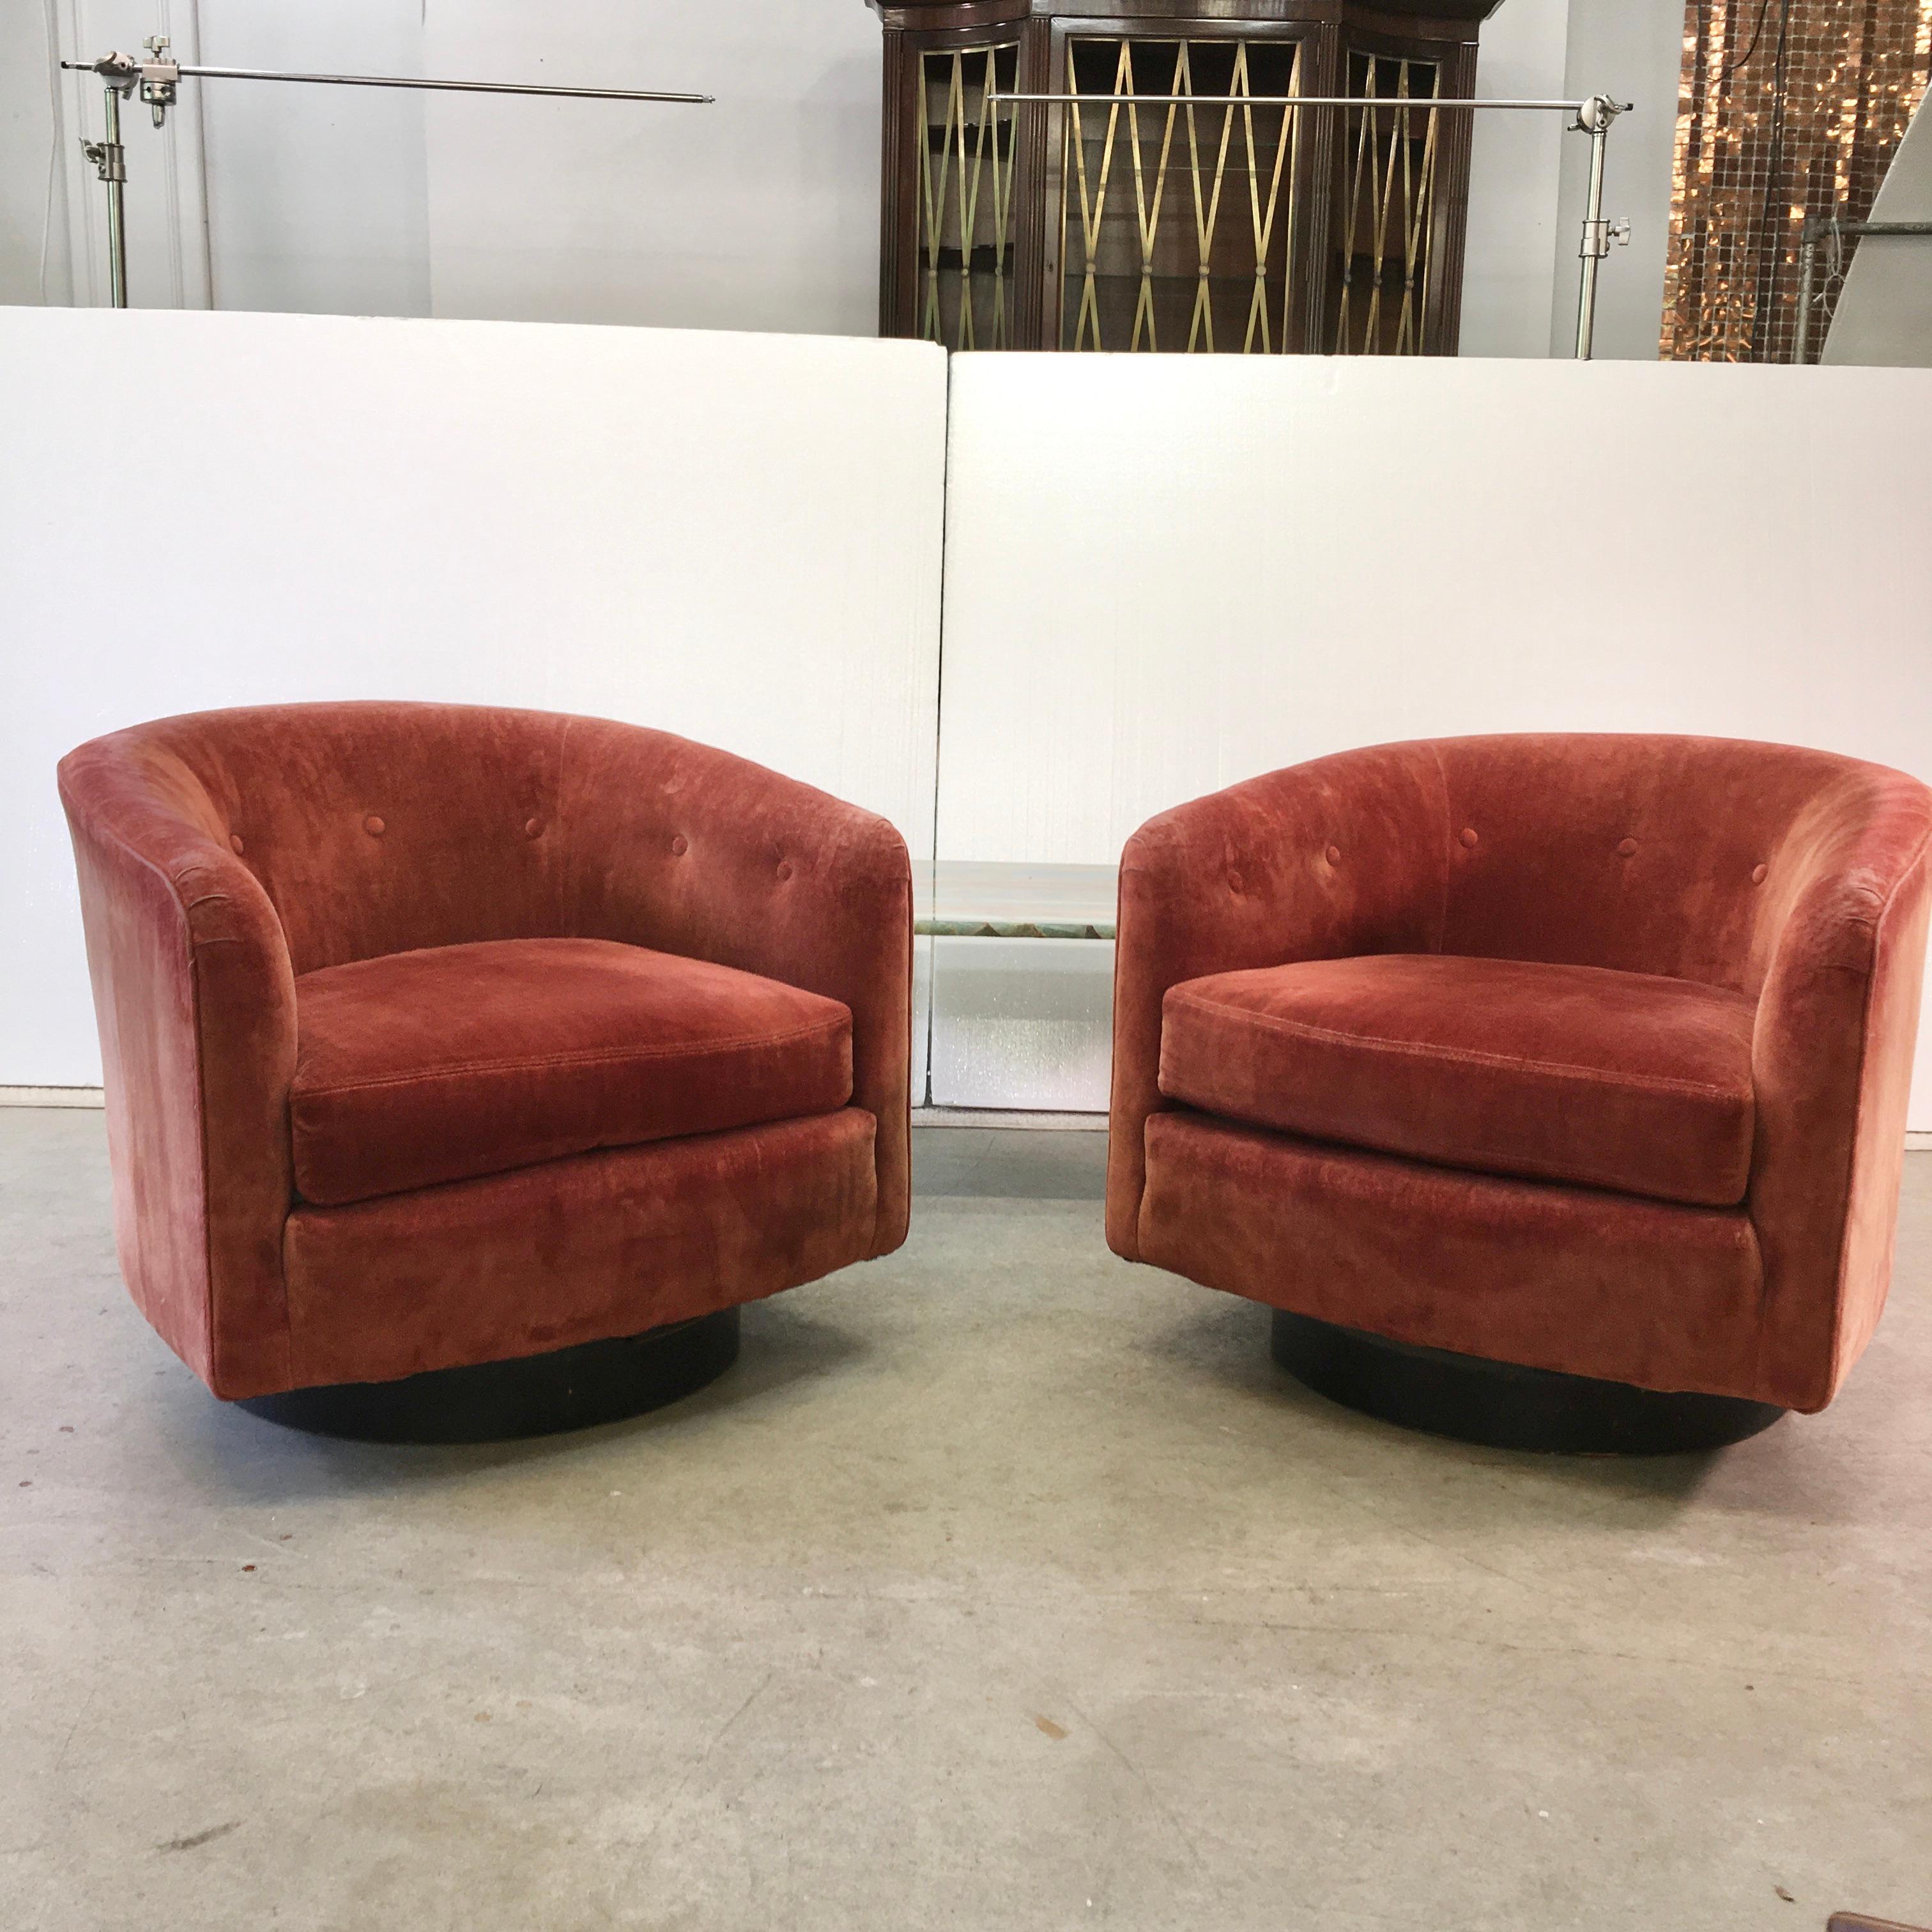 Presented for reupholstering, pair of petite barrel back swivel chairs on black wood plinth base. Original cola red velvet upholstery with button tufts and reversible seat cushion. Labeled Woodmark Originals.
See original vintage ad from The South